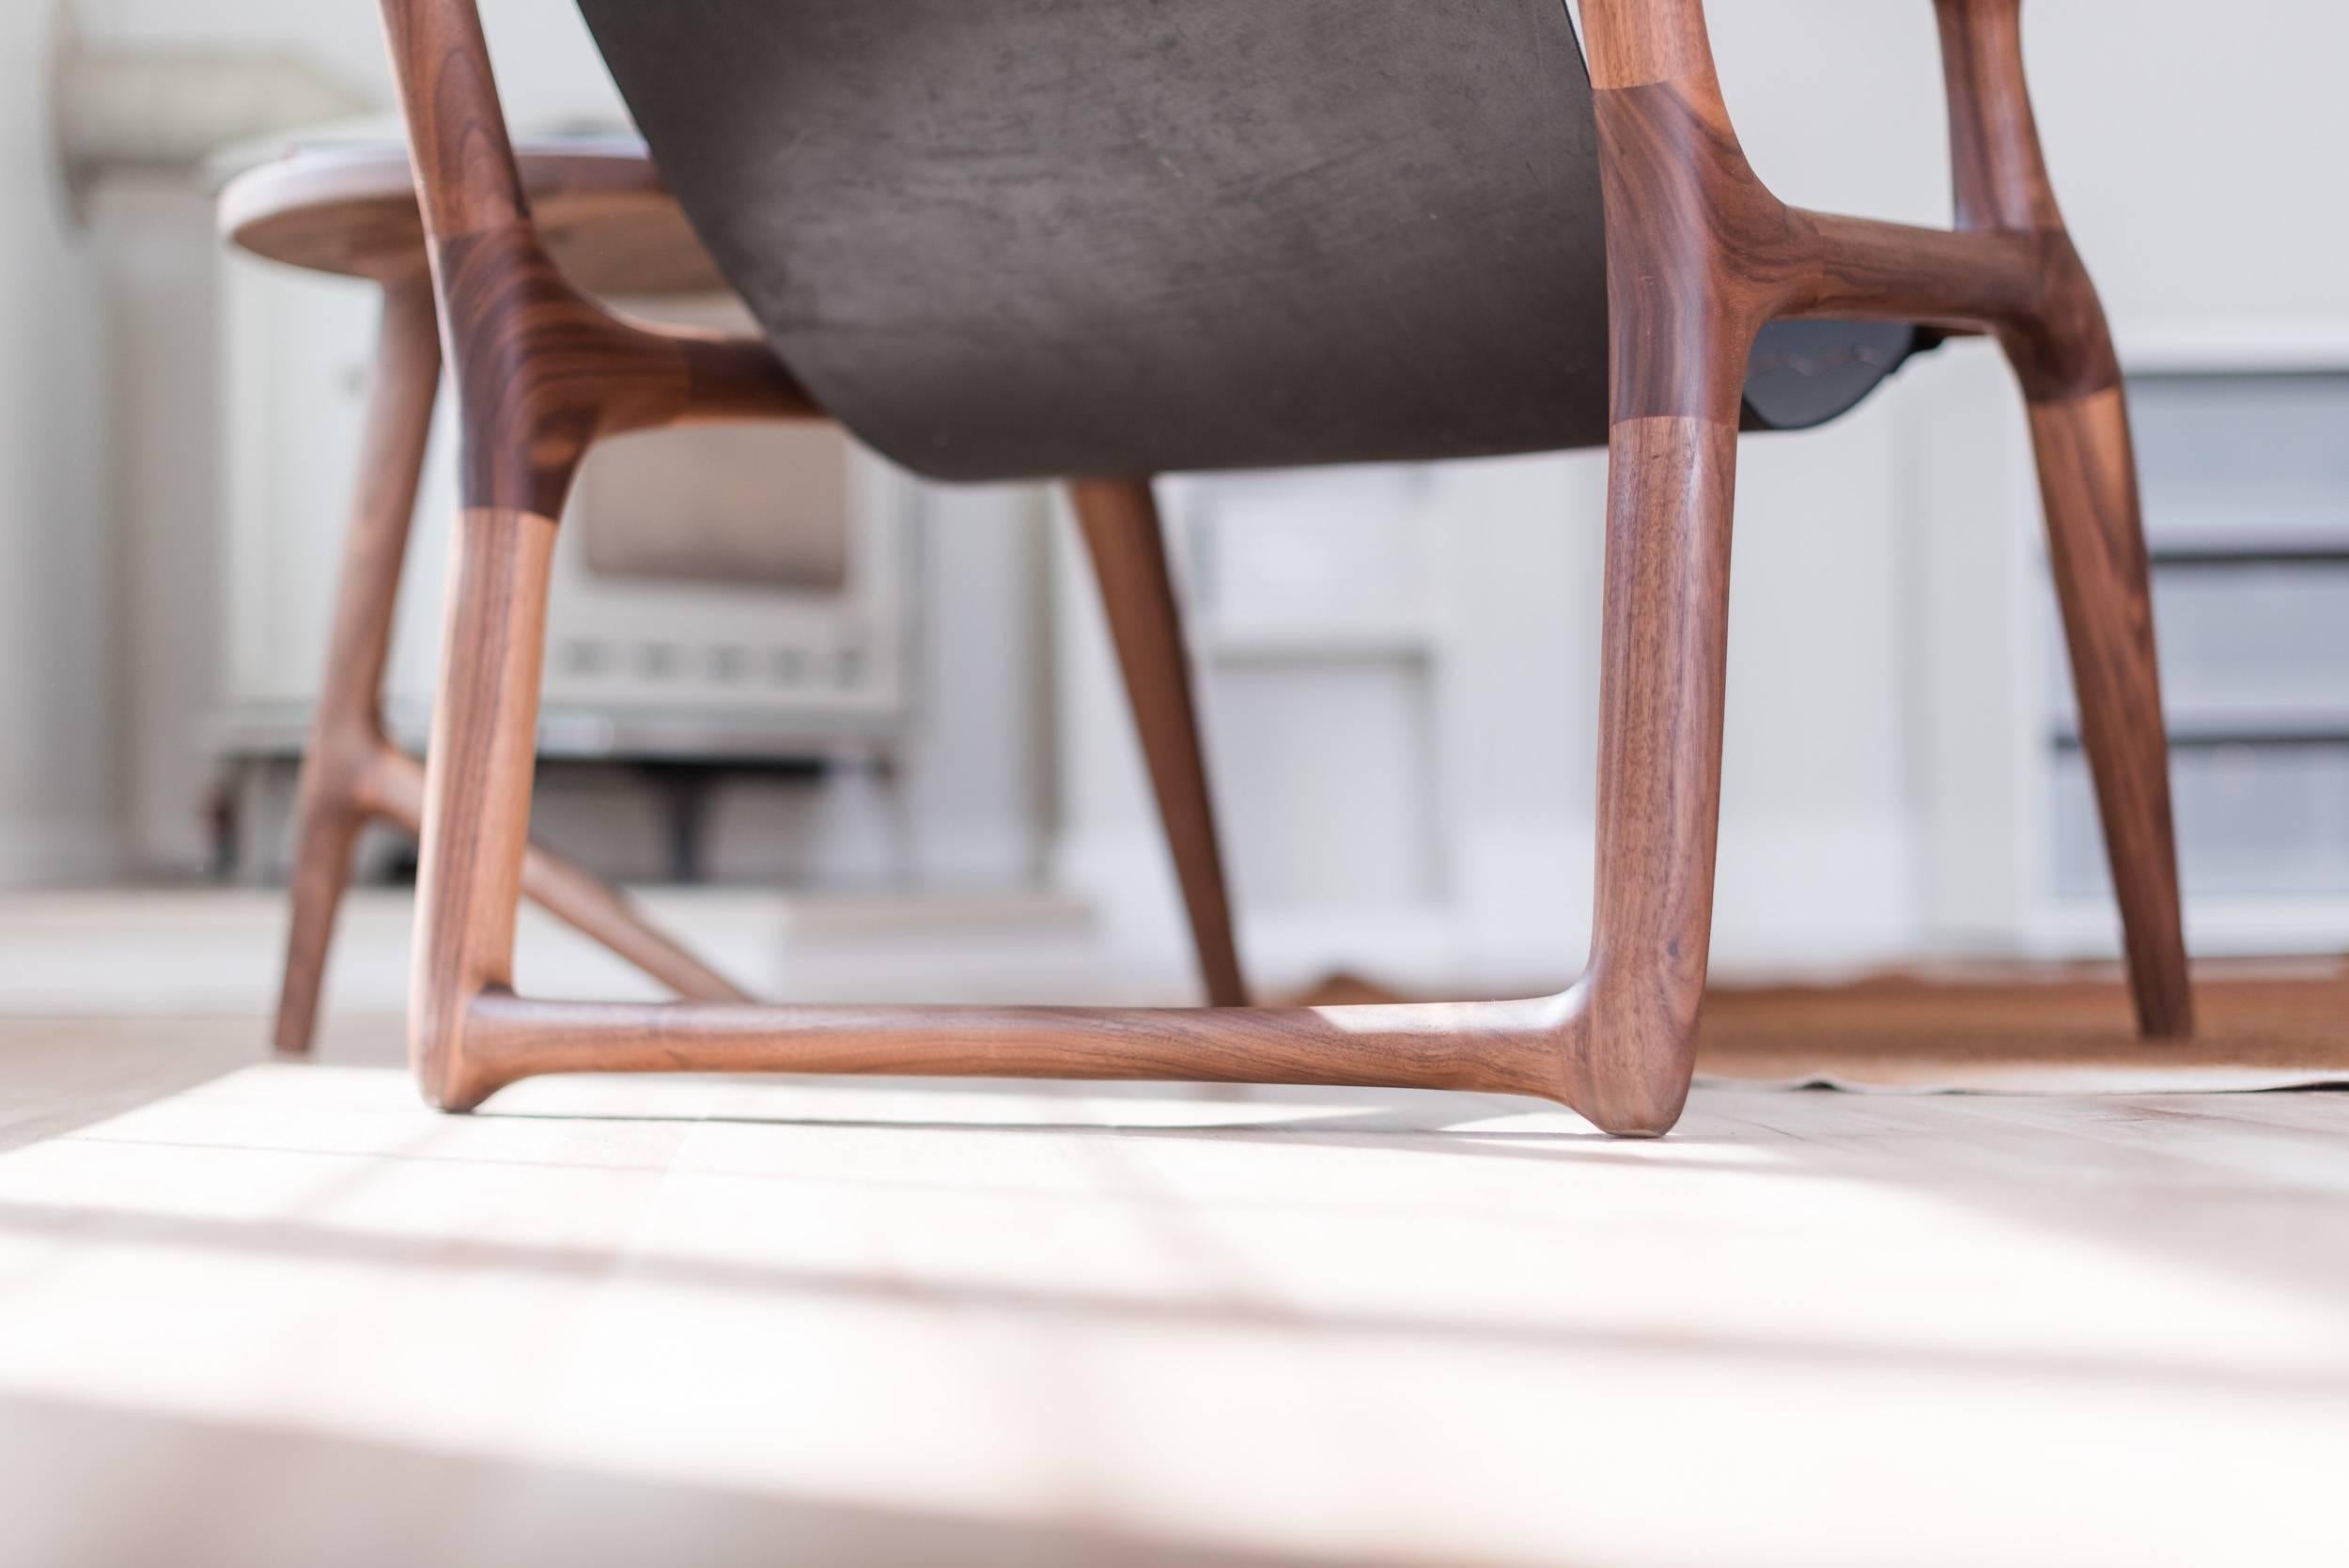 This award winning piece is the inaugural chair design by Fernweh Woodworking. The frame is hand-shaped from high quality American Walnut, providing rich warm brown tones with sleek joinery inspired by Danish, Scandinavian, and mid-century modern